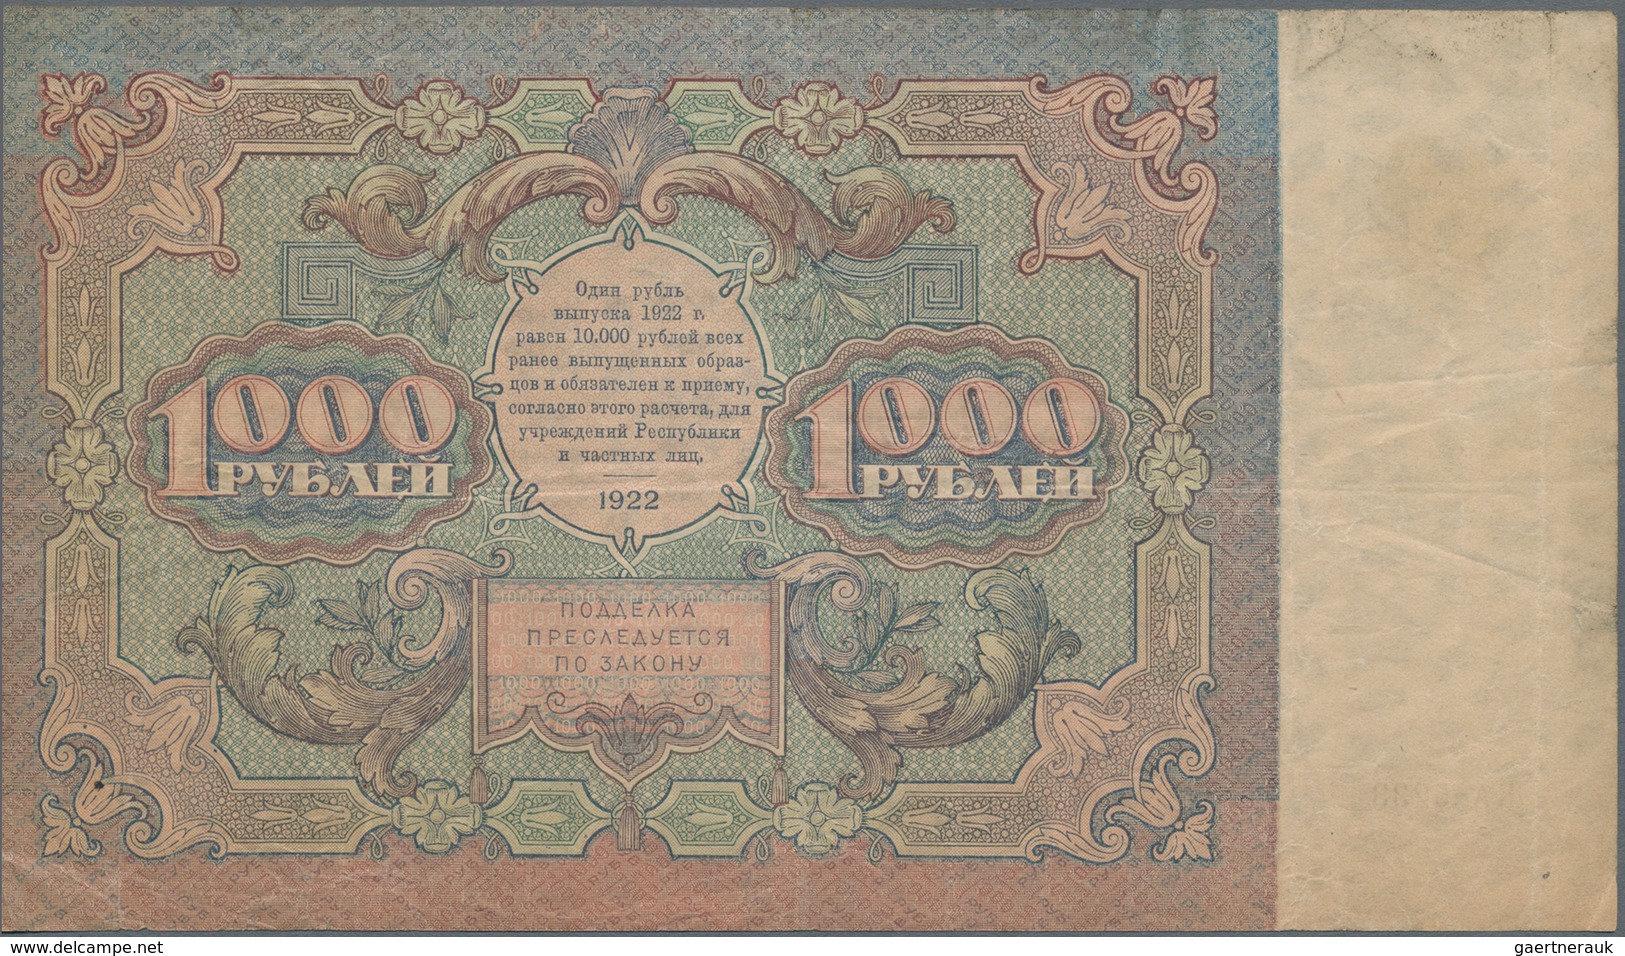 Russia / Russland: Pair Of The State Currency Notes Series 1922 With 500 Rubles With Cashier Signatu - Russie